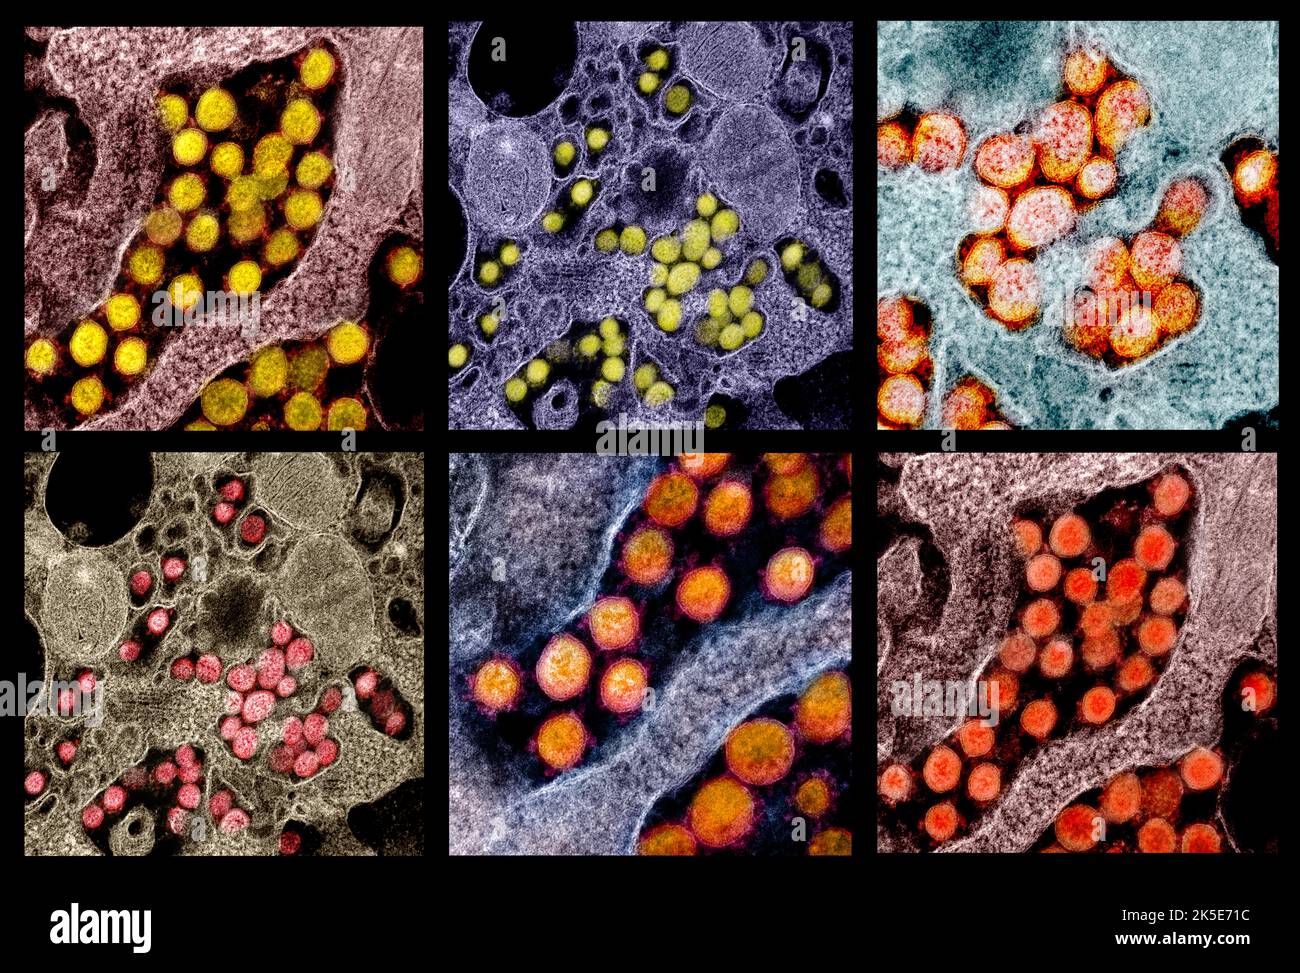 A composite of images of the Novel Coronavirus SARS-CoV-2. Transmission electron micrographs of SARS-CoV-2 virus particles, isolated from a patient.  An optimised and enhanced unique composite version of six scanning electron micrograph images, Credit: NIAID Stock Photo